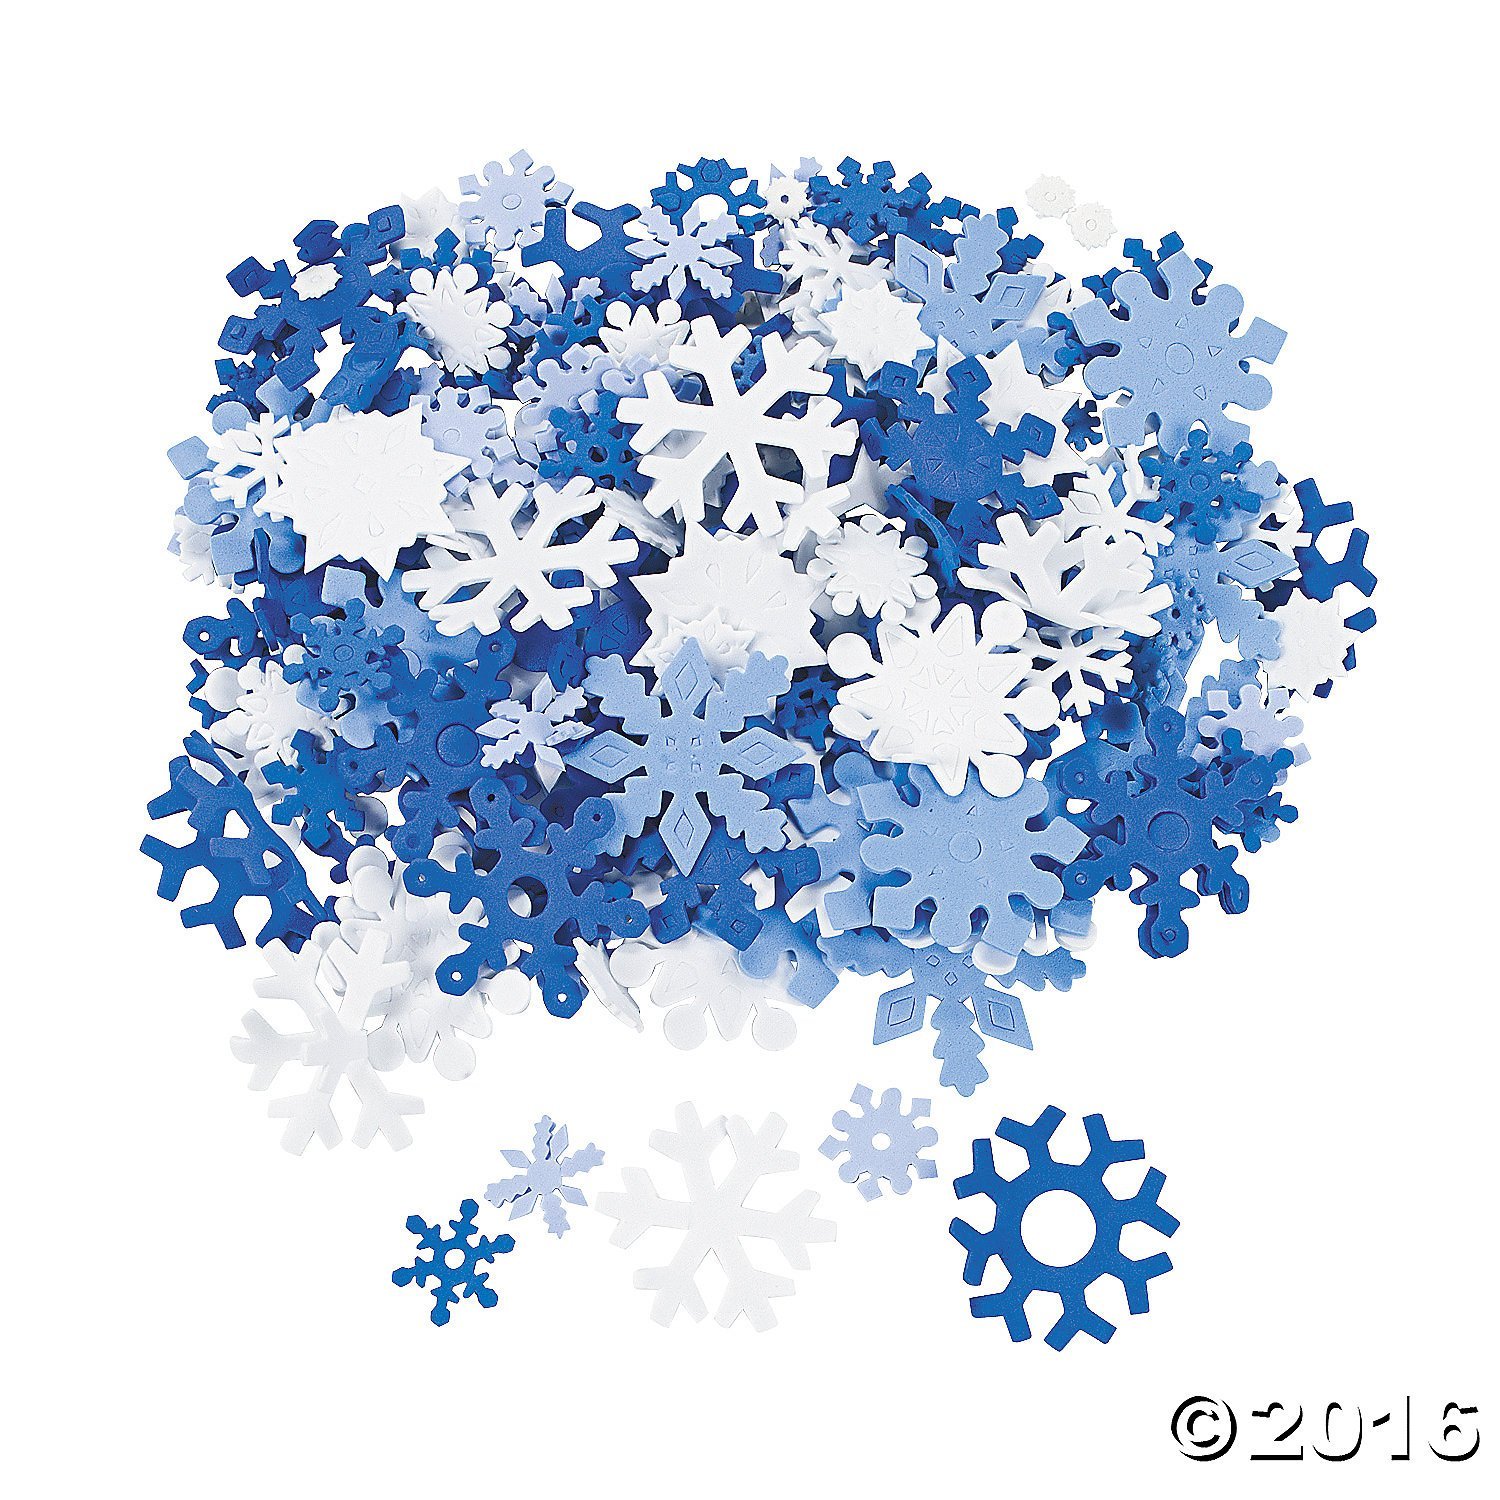 Amazon.com: 400 Foam Snowflakes for Craft Projects: Toys & Games